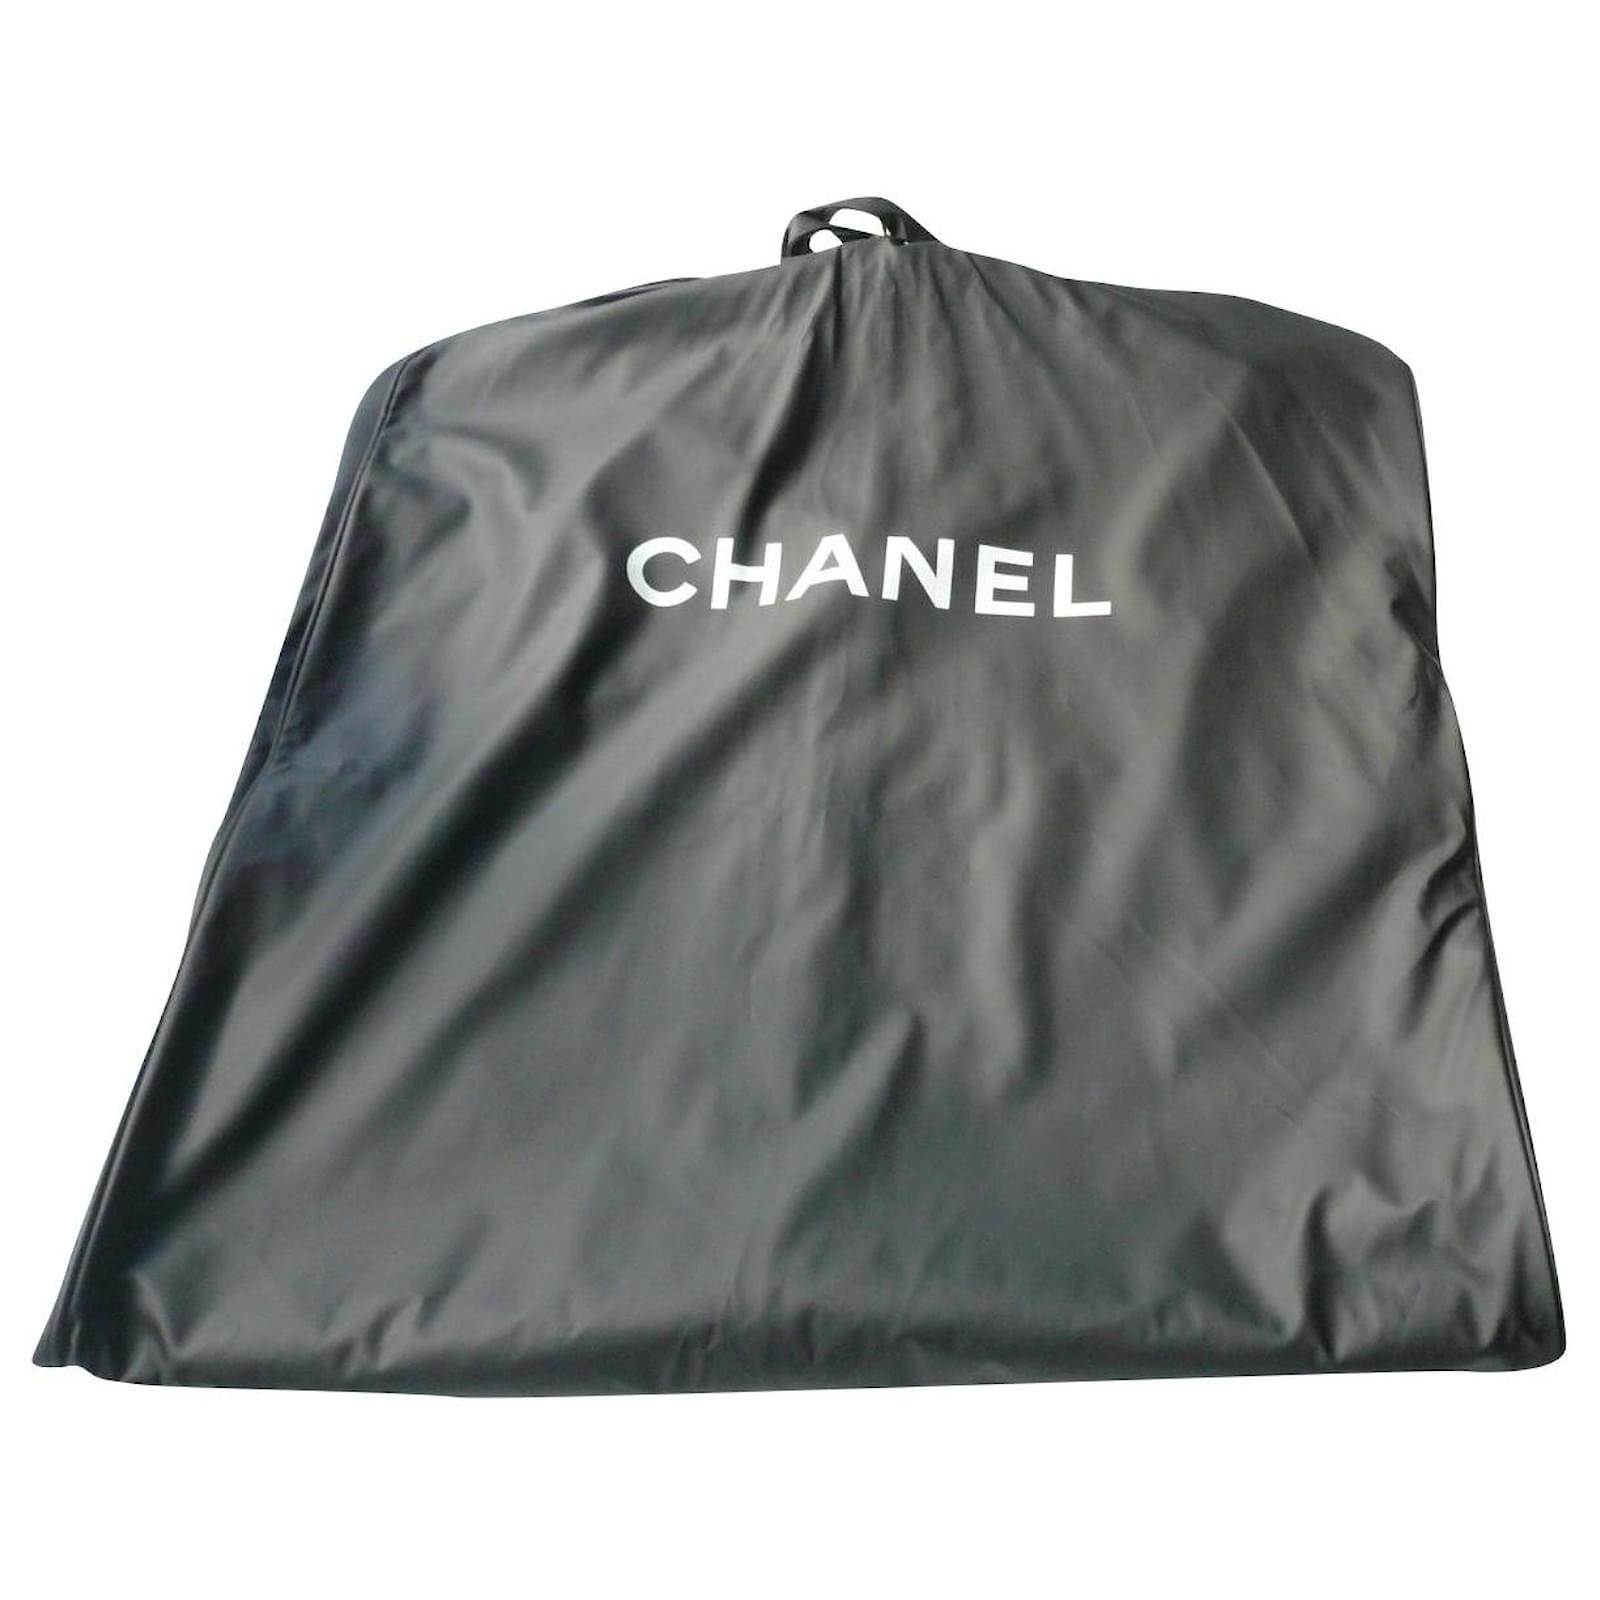 CHANEL Travel very good condition waterproof canvas garment cover